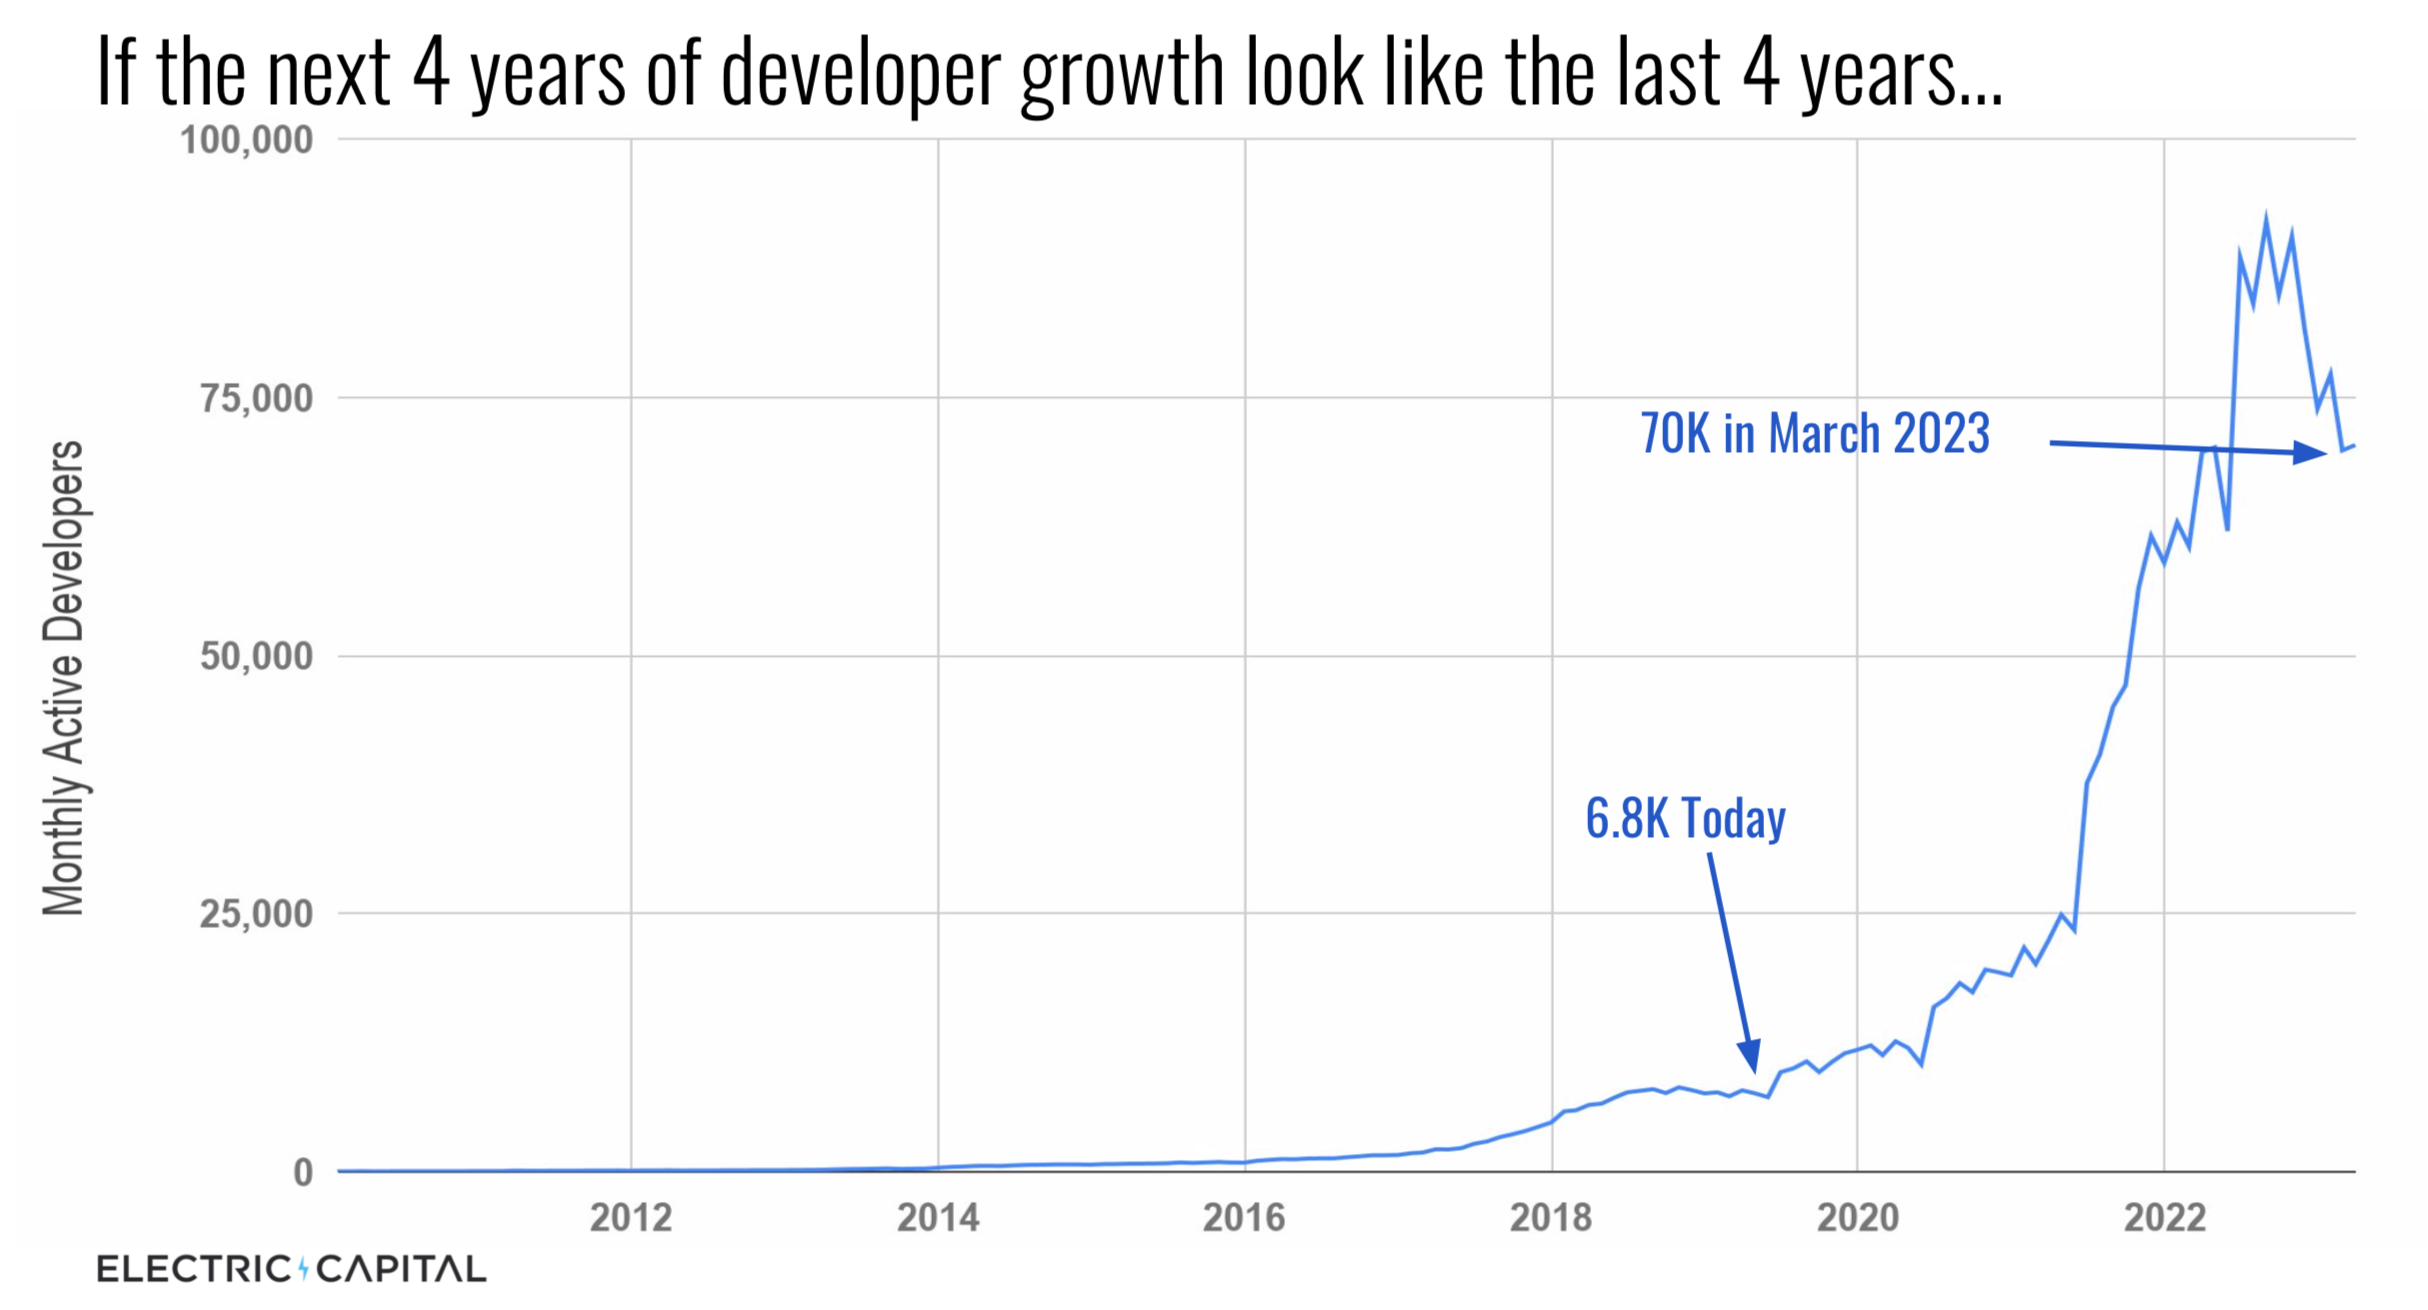 Next 4 Years of Developer Growth